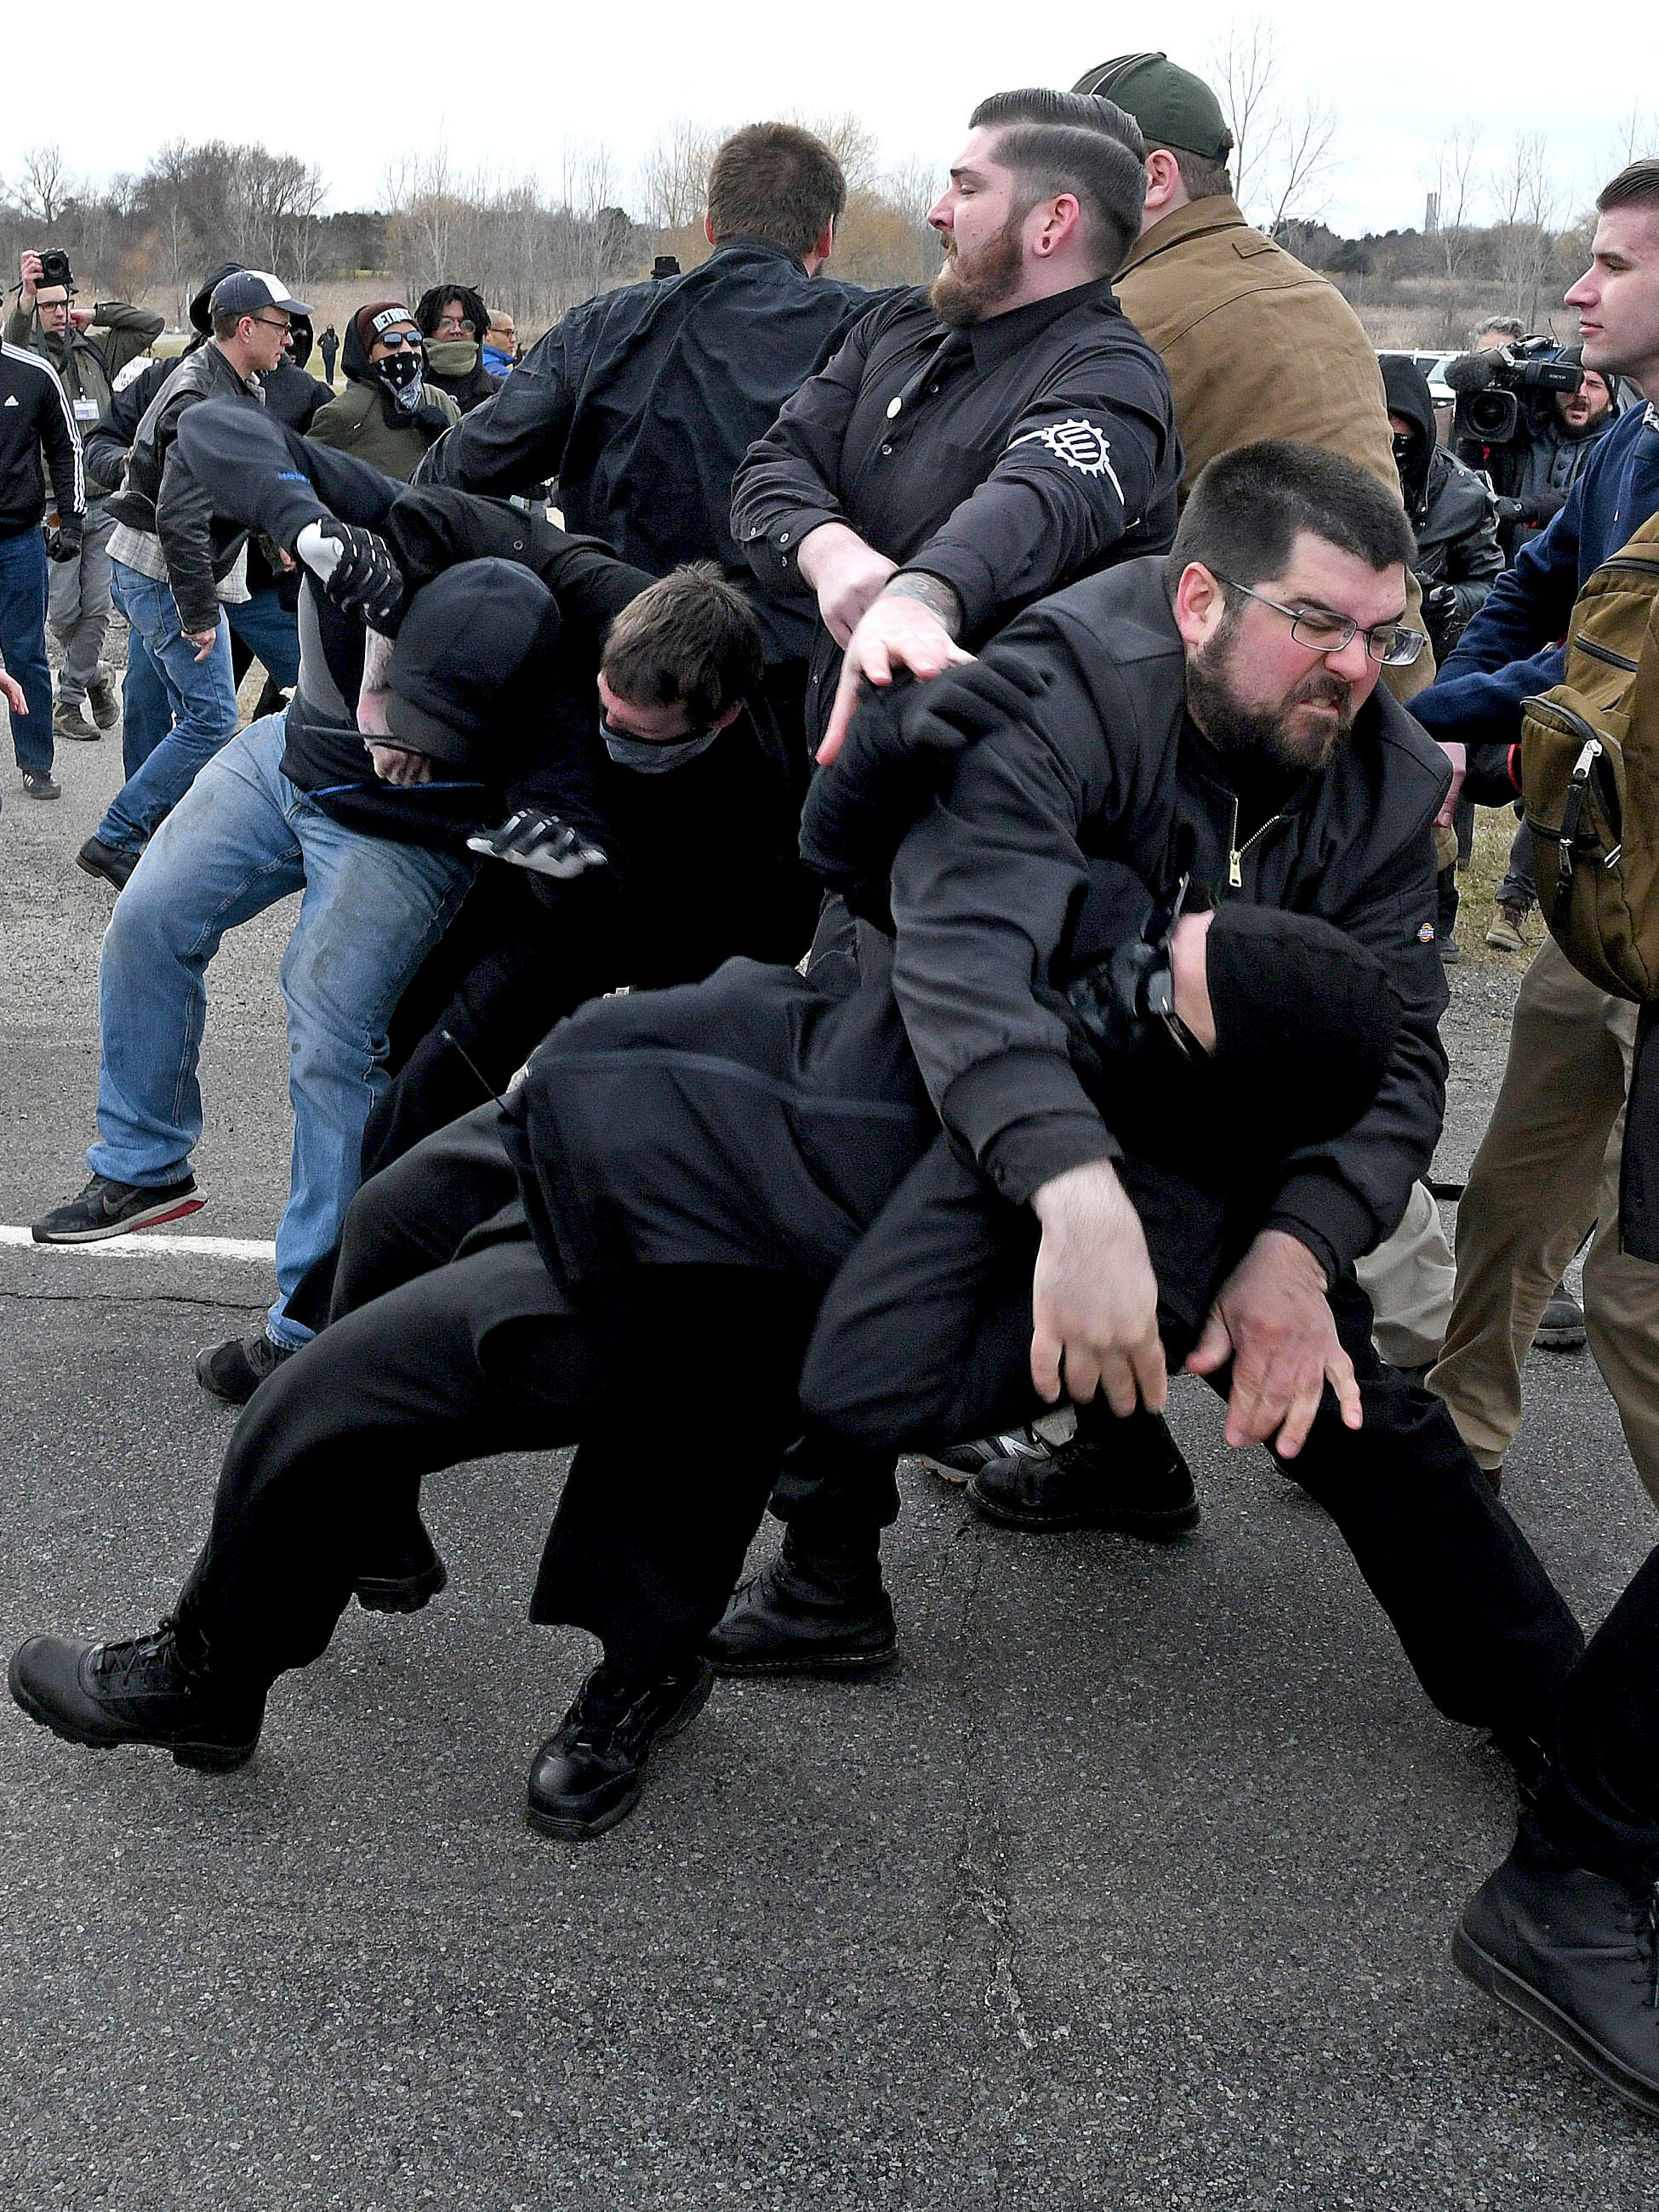 Matthew Heimbach, top, leader of the white nationalist Traditional Workers Party, throws a protester to the ground.